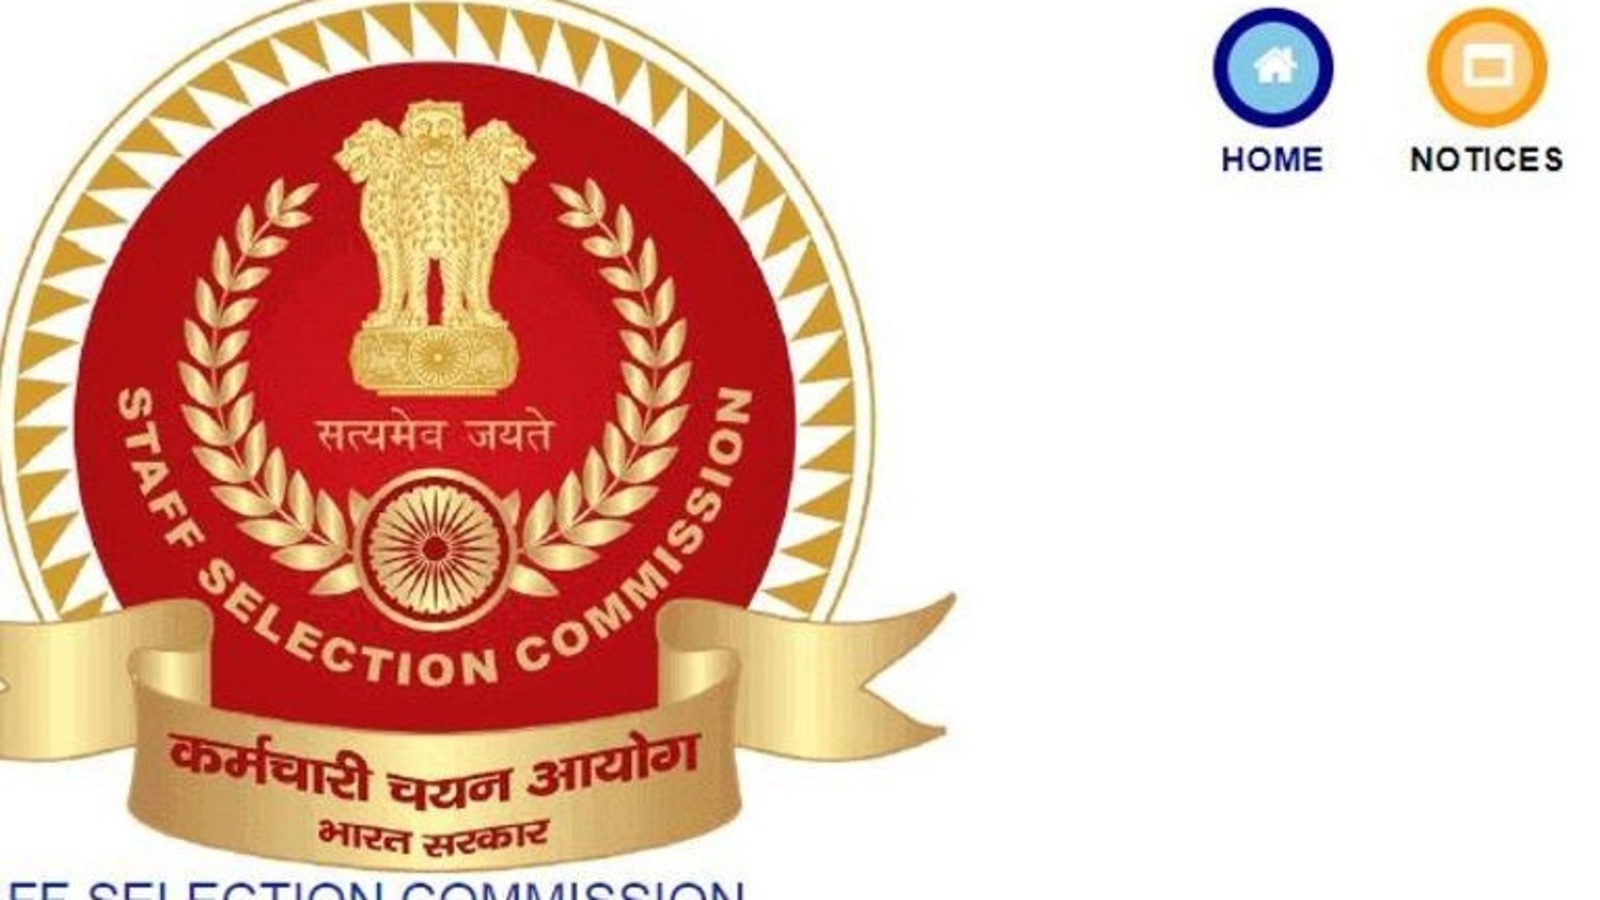 SSC JHT 2020 paper 2 result this week, know how to check